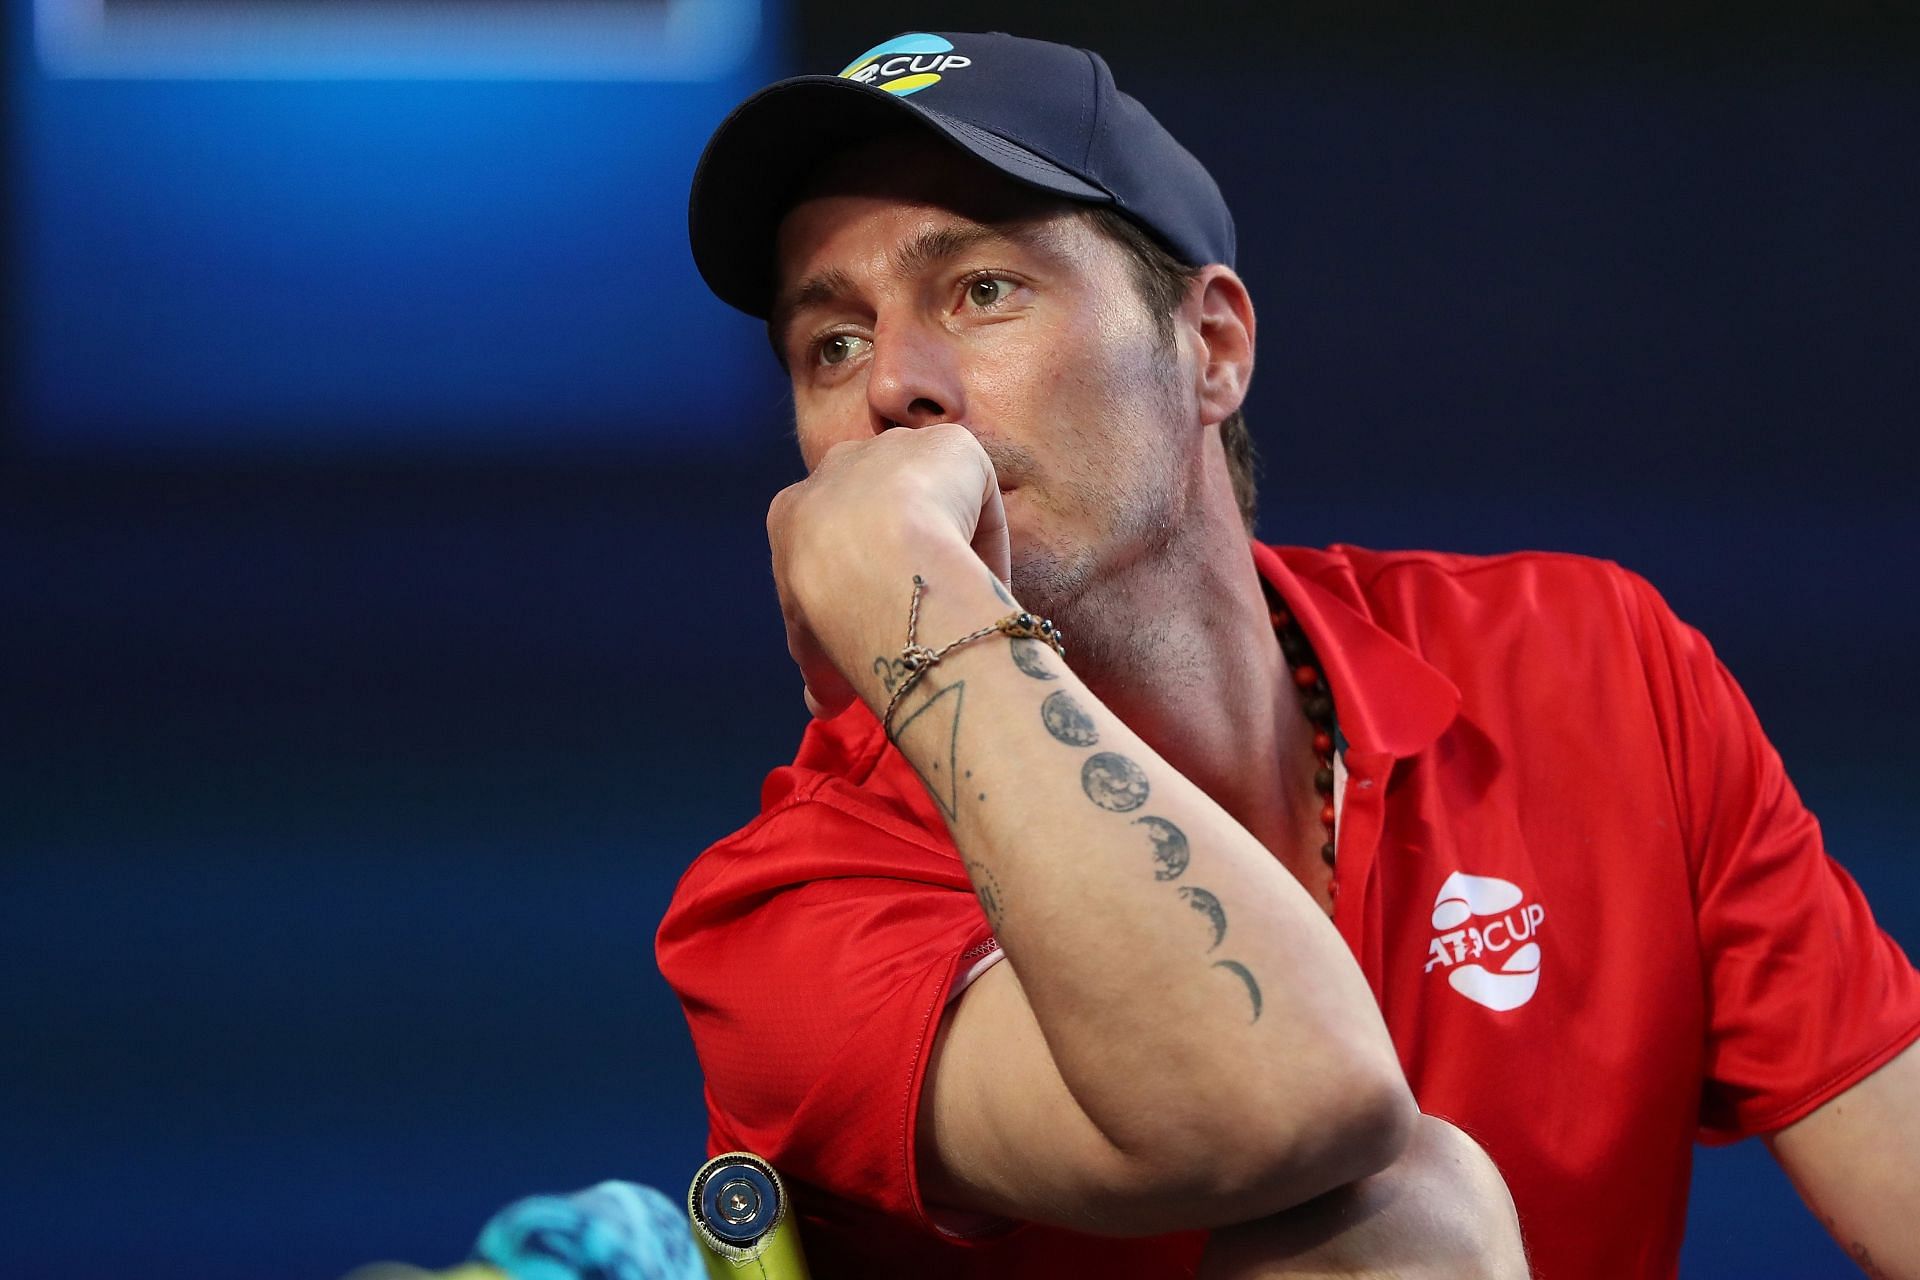 Marat Safin has lost both matches against Rafael Nadal in straight sets